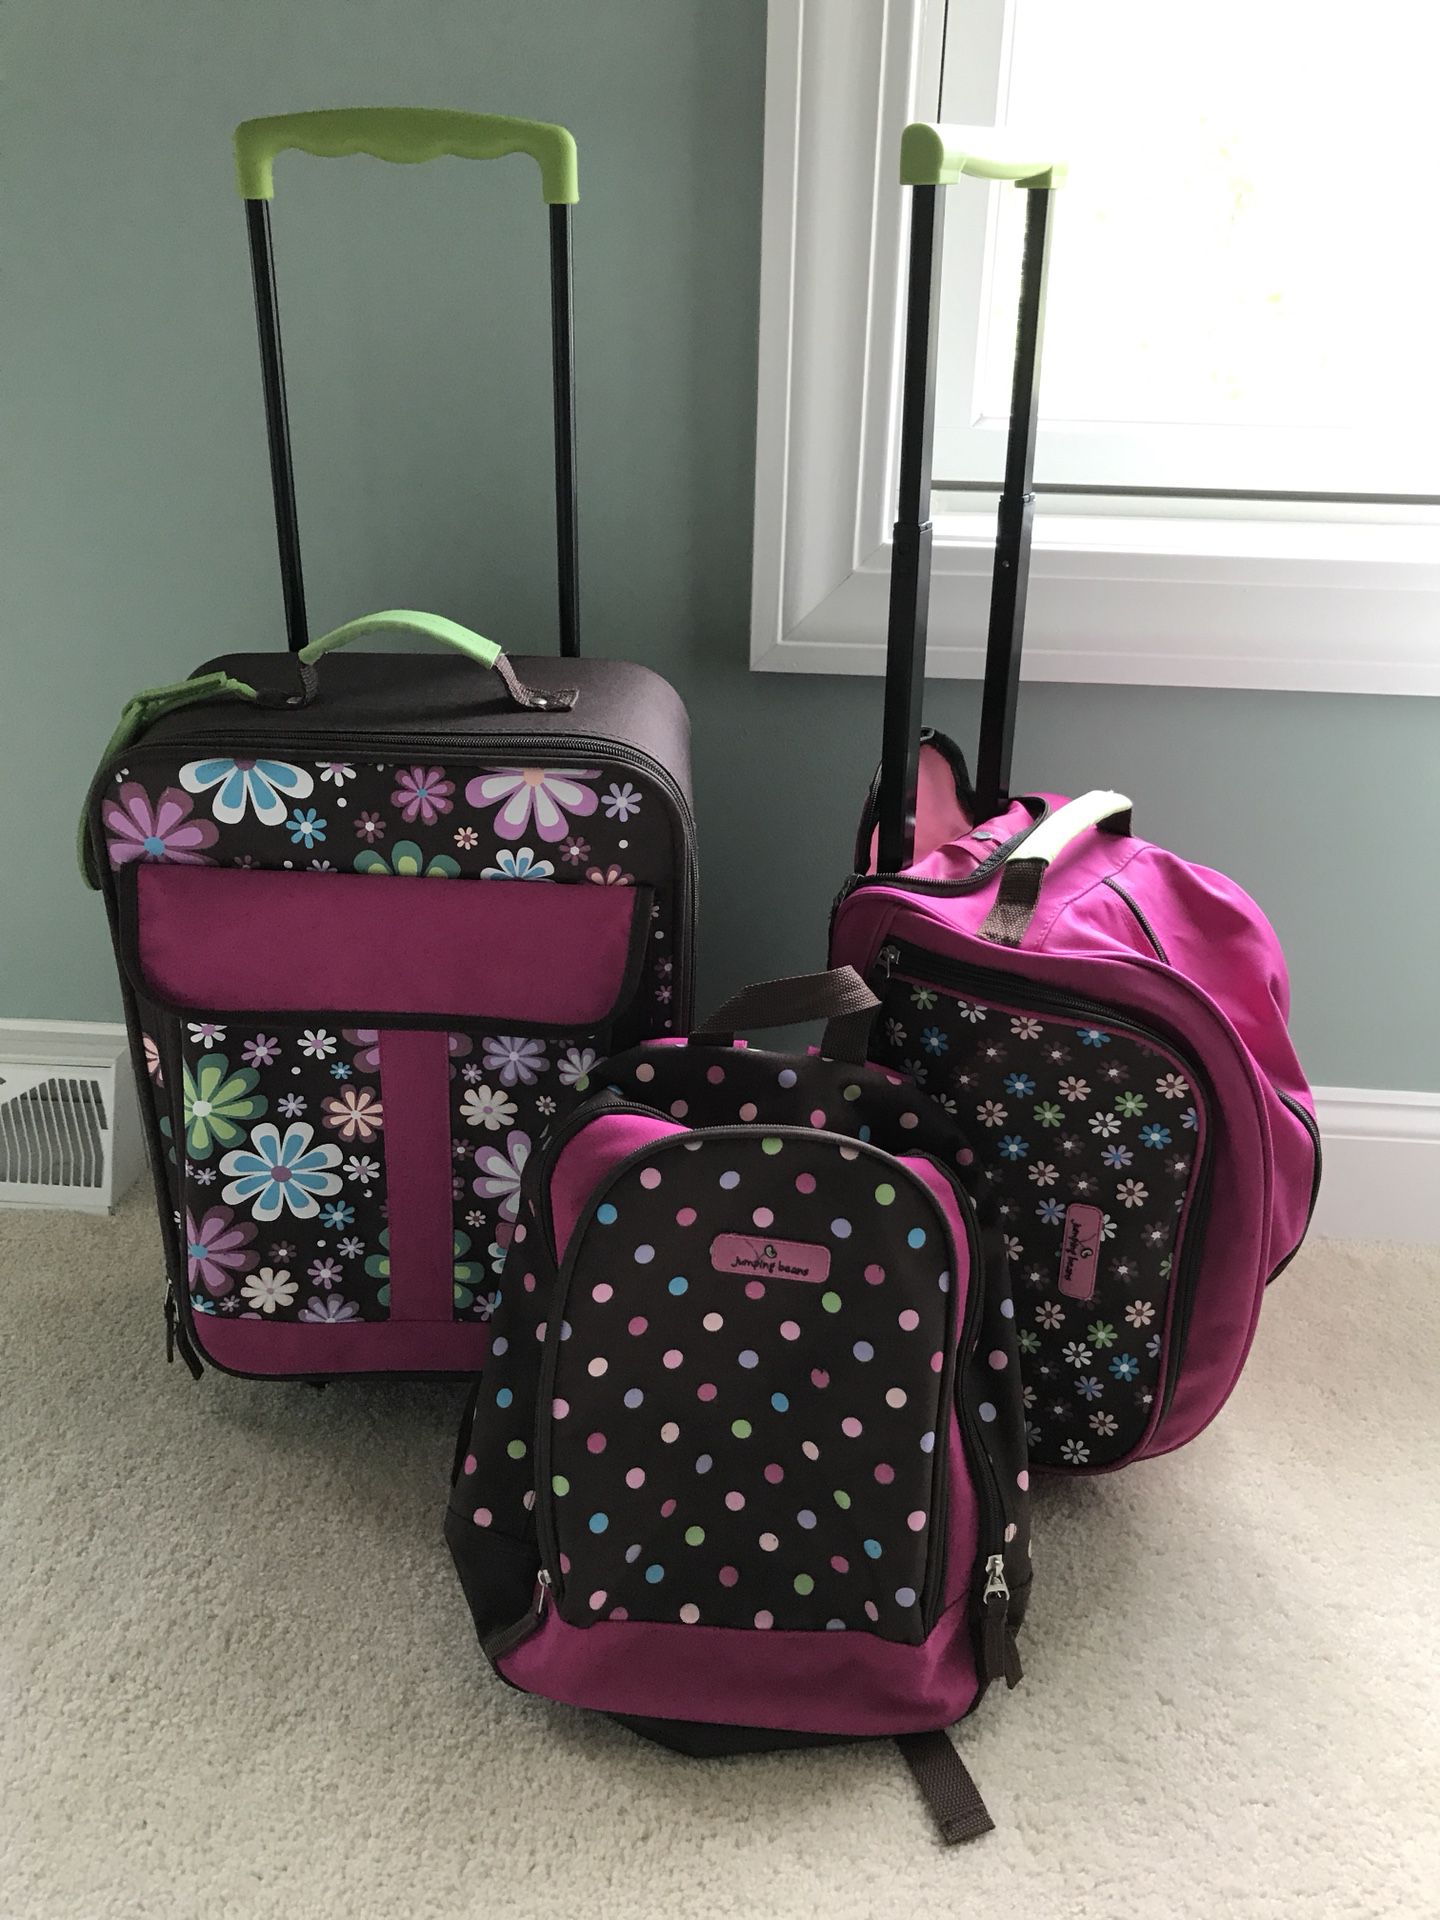 JUMPING BEAN KID'S LUGGAGE SET for Sale in Guilderland, NY - OfferUp